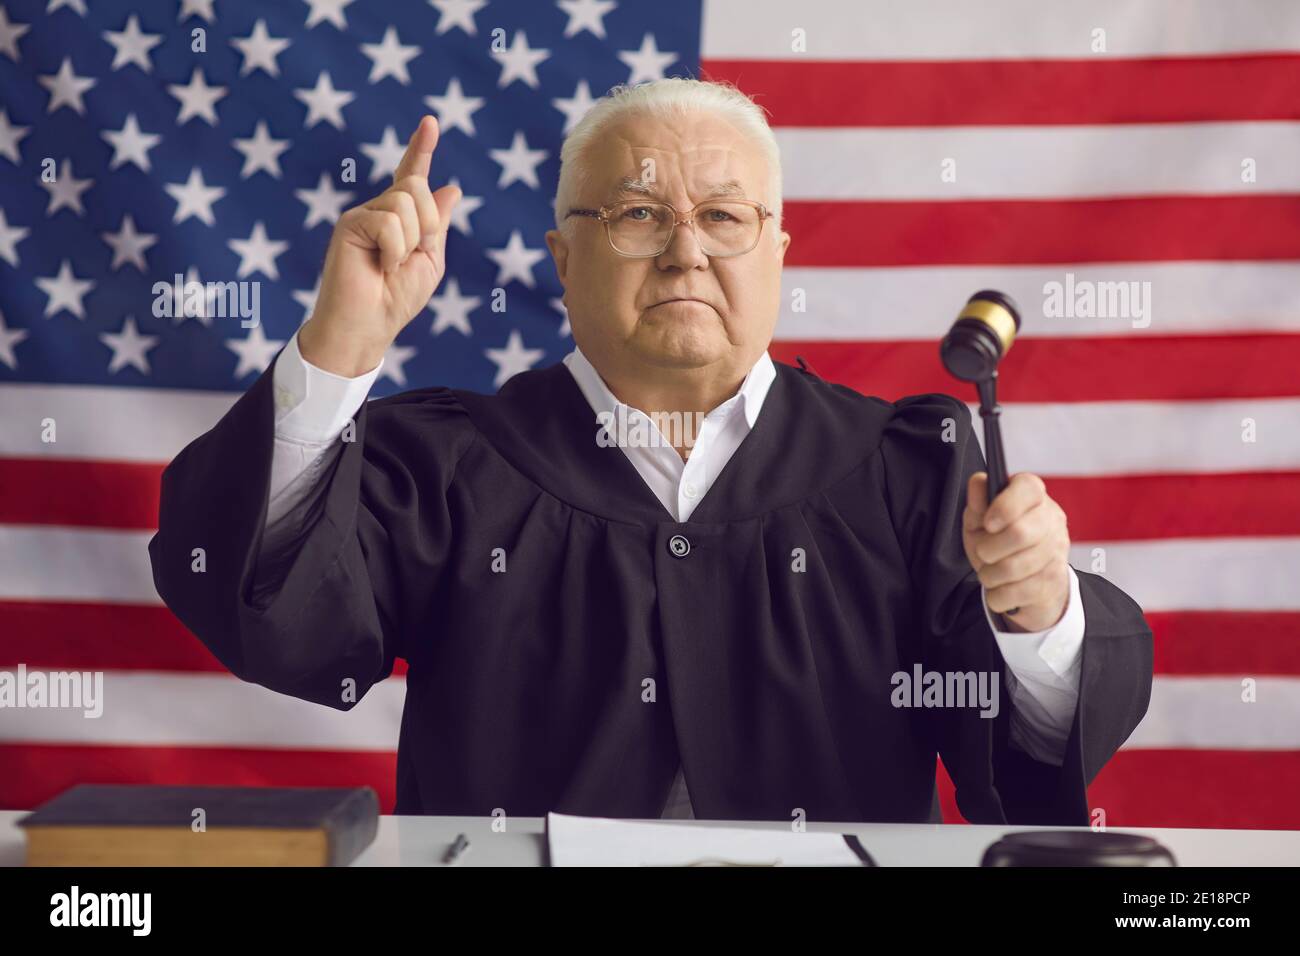 Serious American judge holding gavel and pronouncing his sentence in a court of law Stock Photo